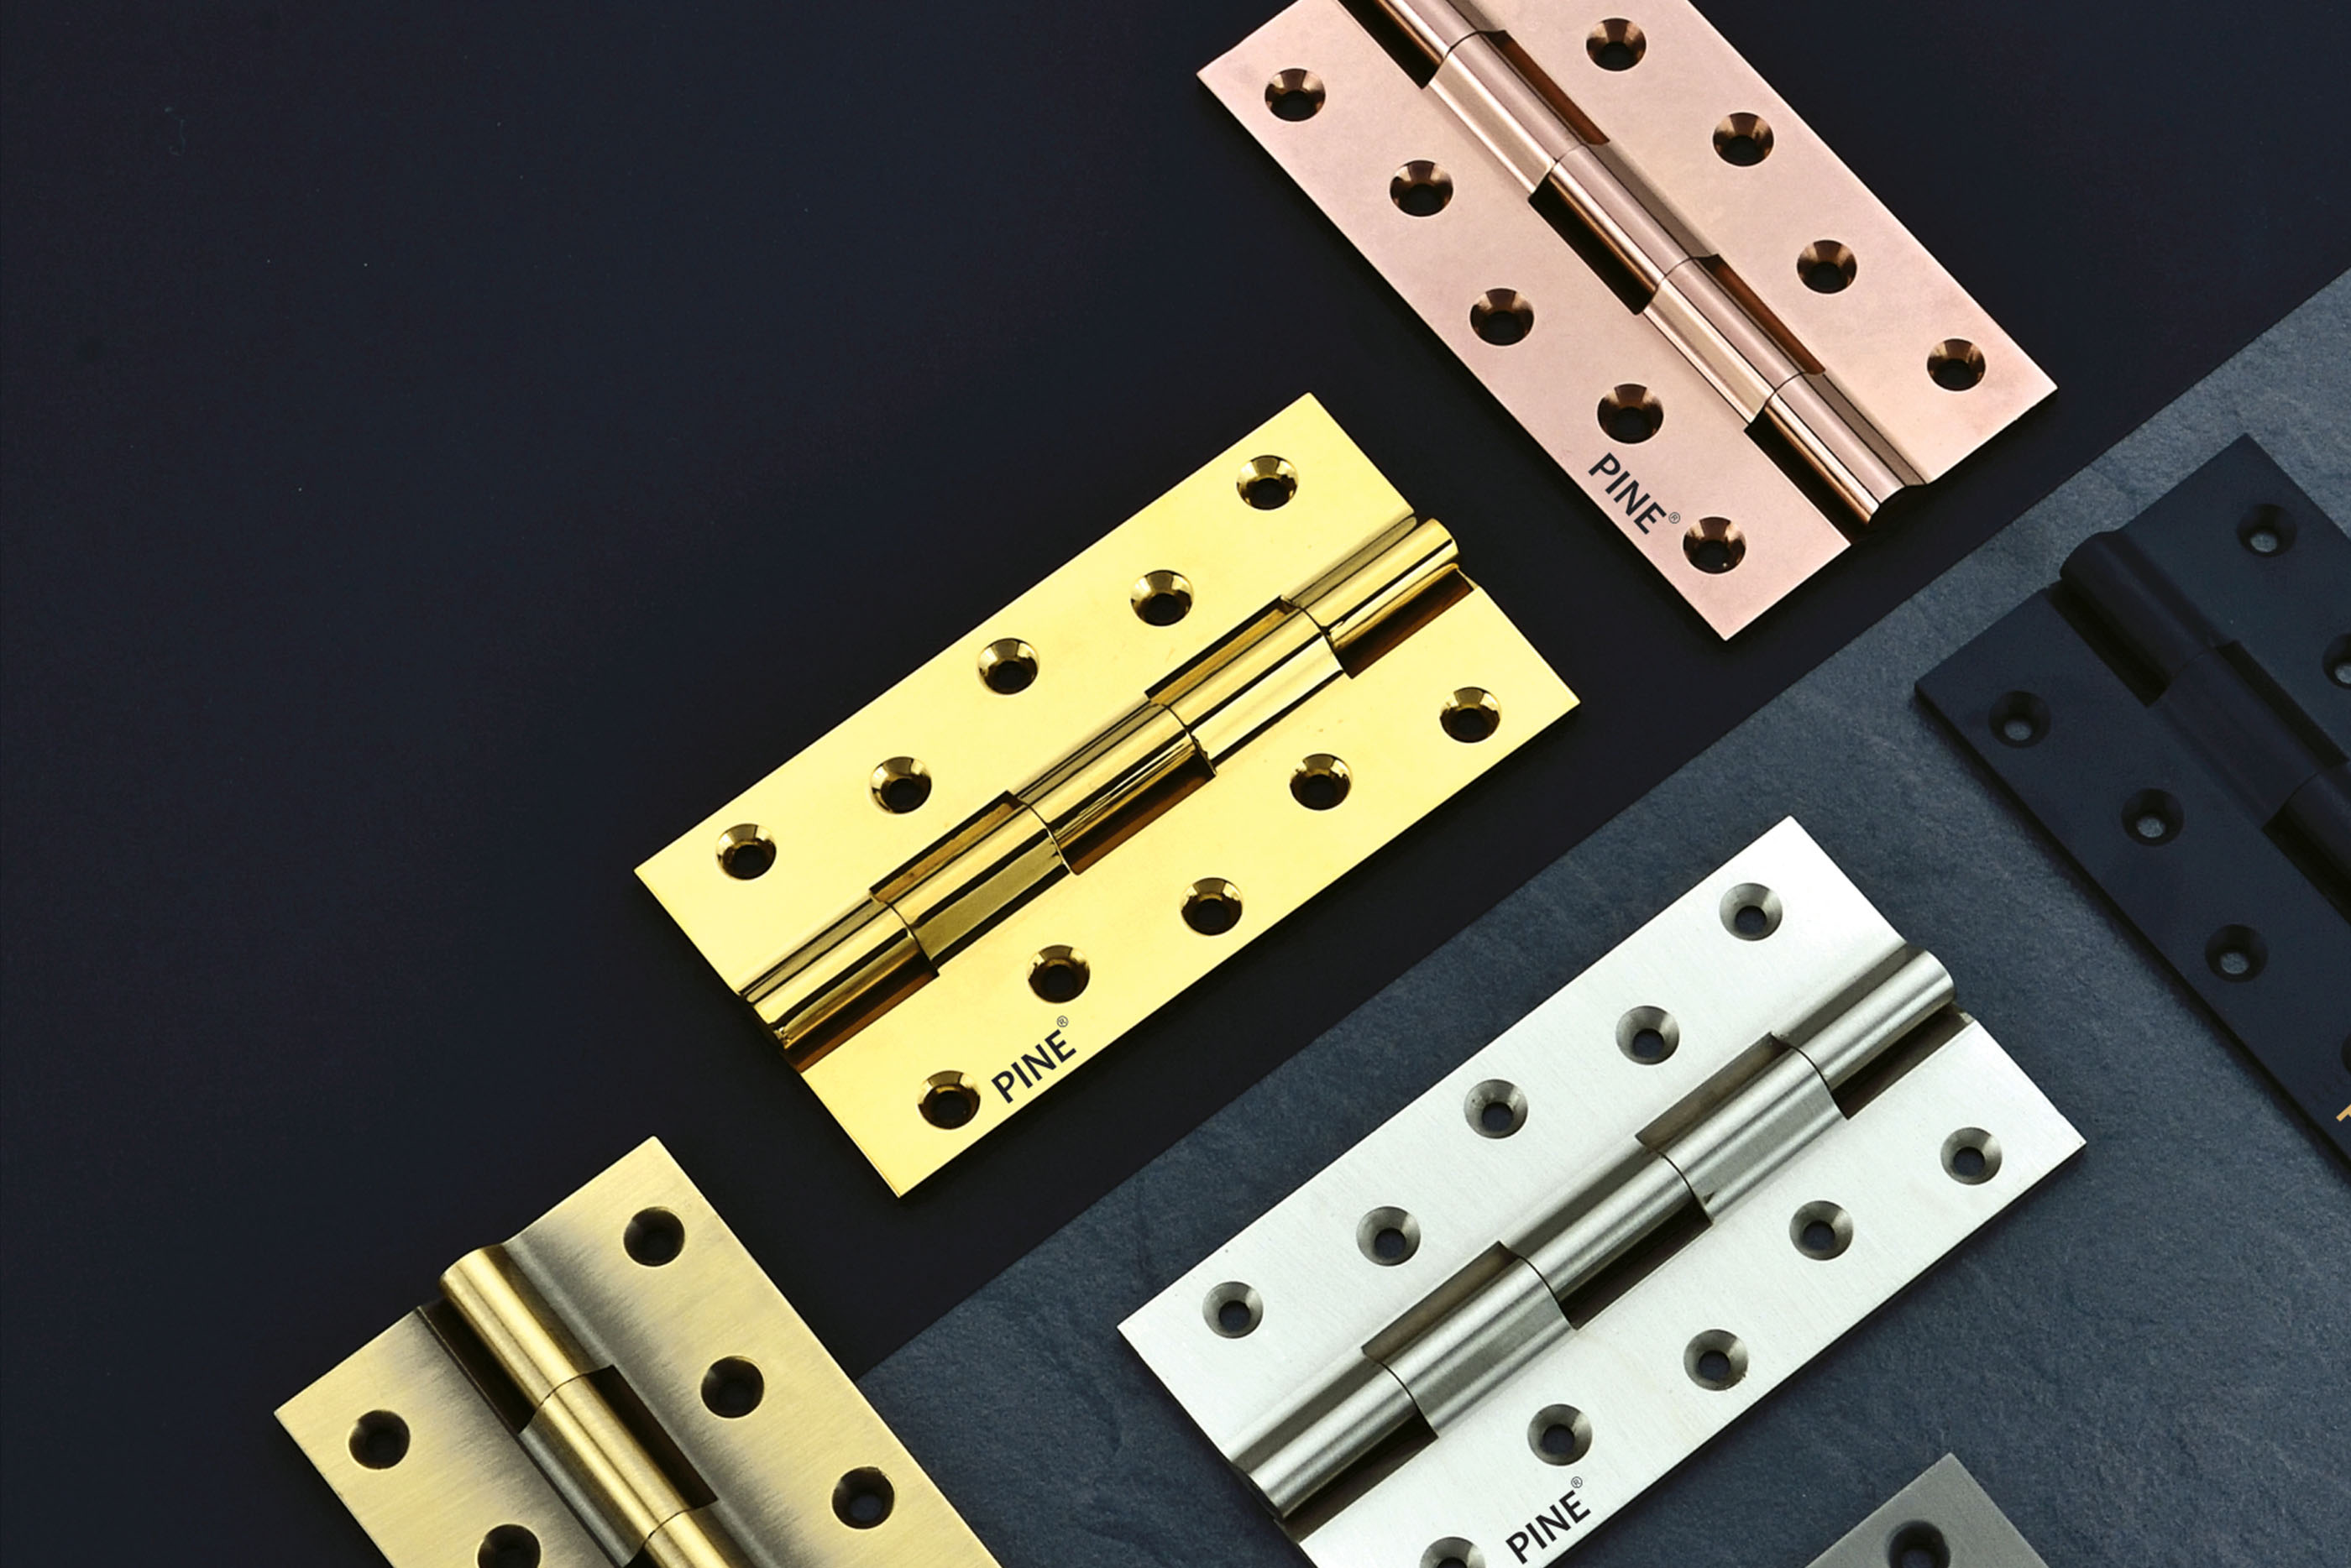 Brass Railway Hinges, Hardware Products